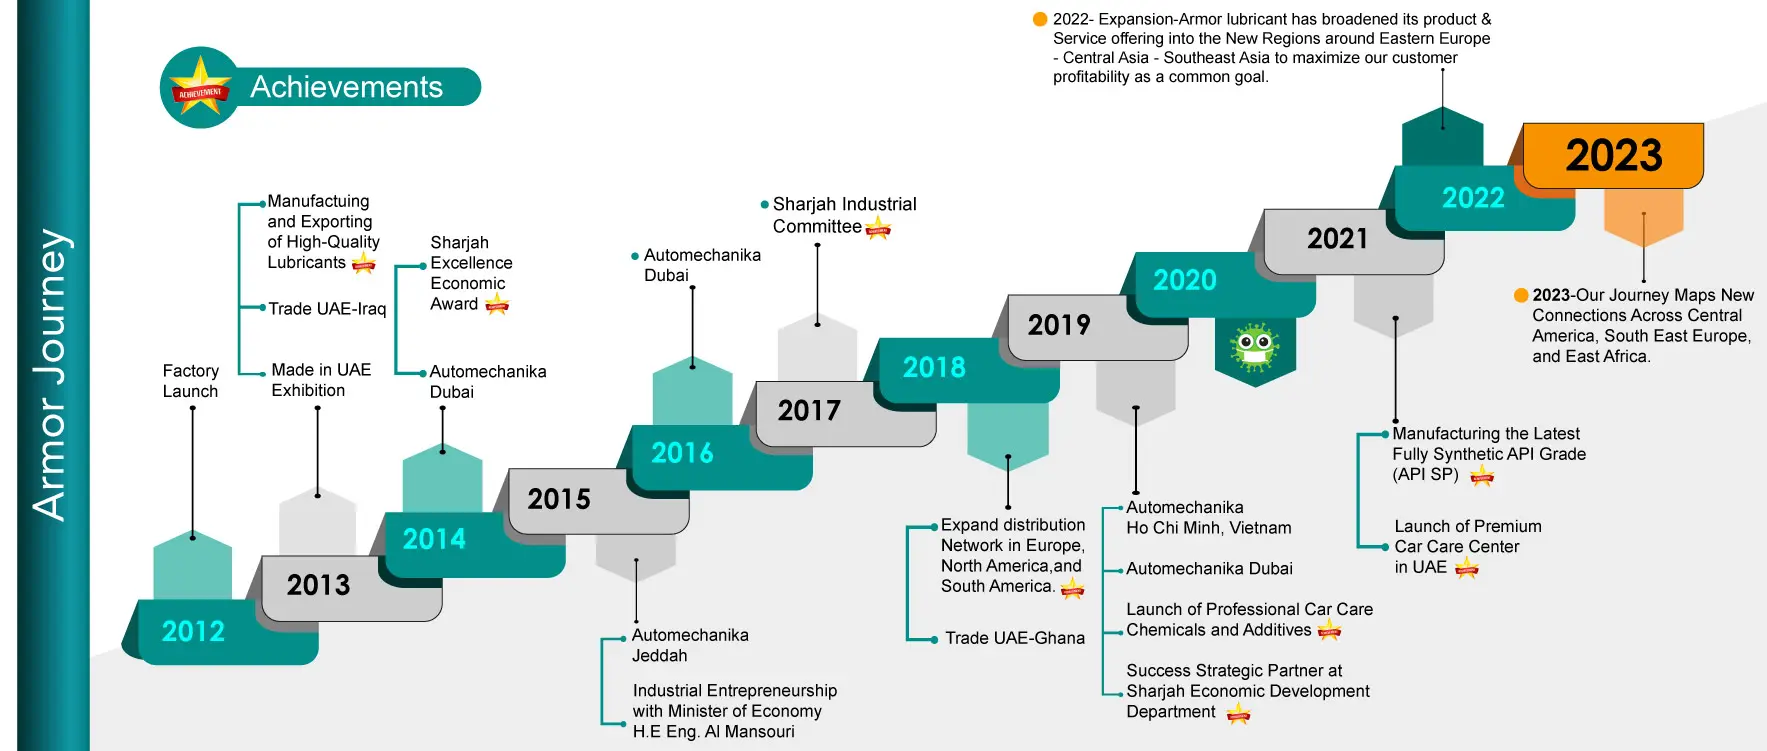 Armor Lubricants Manufacturer Journey from 2012-2021